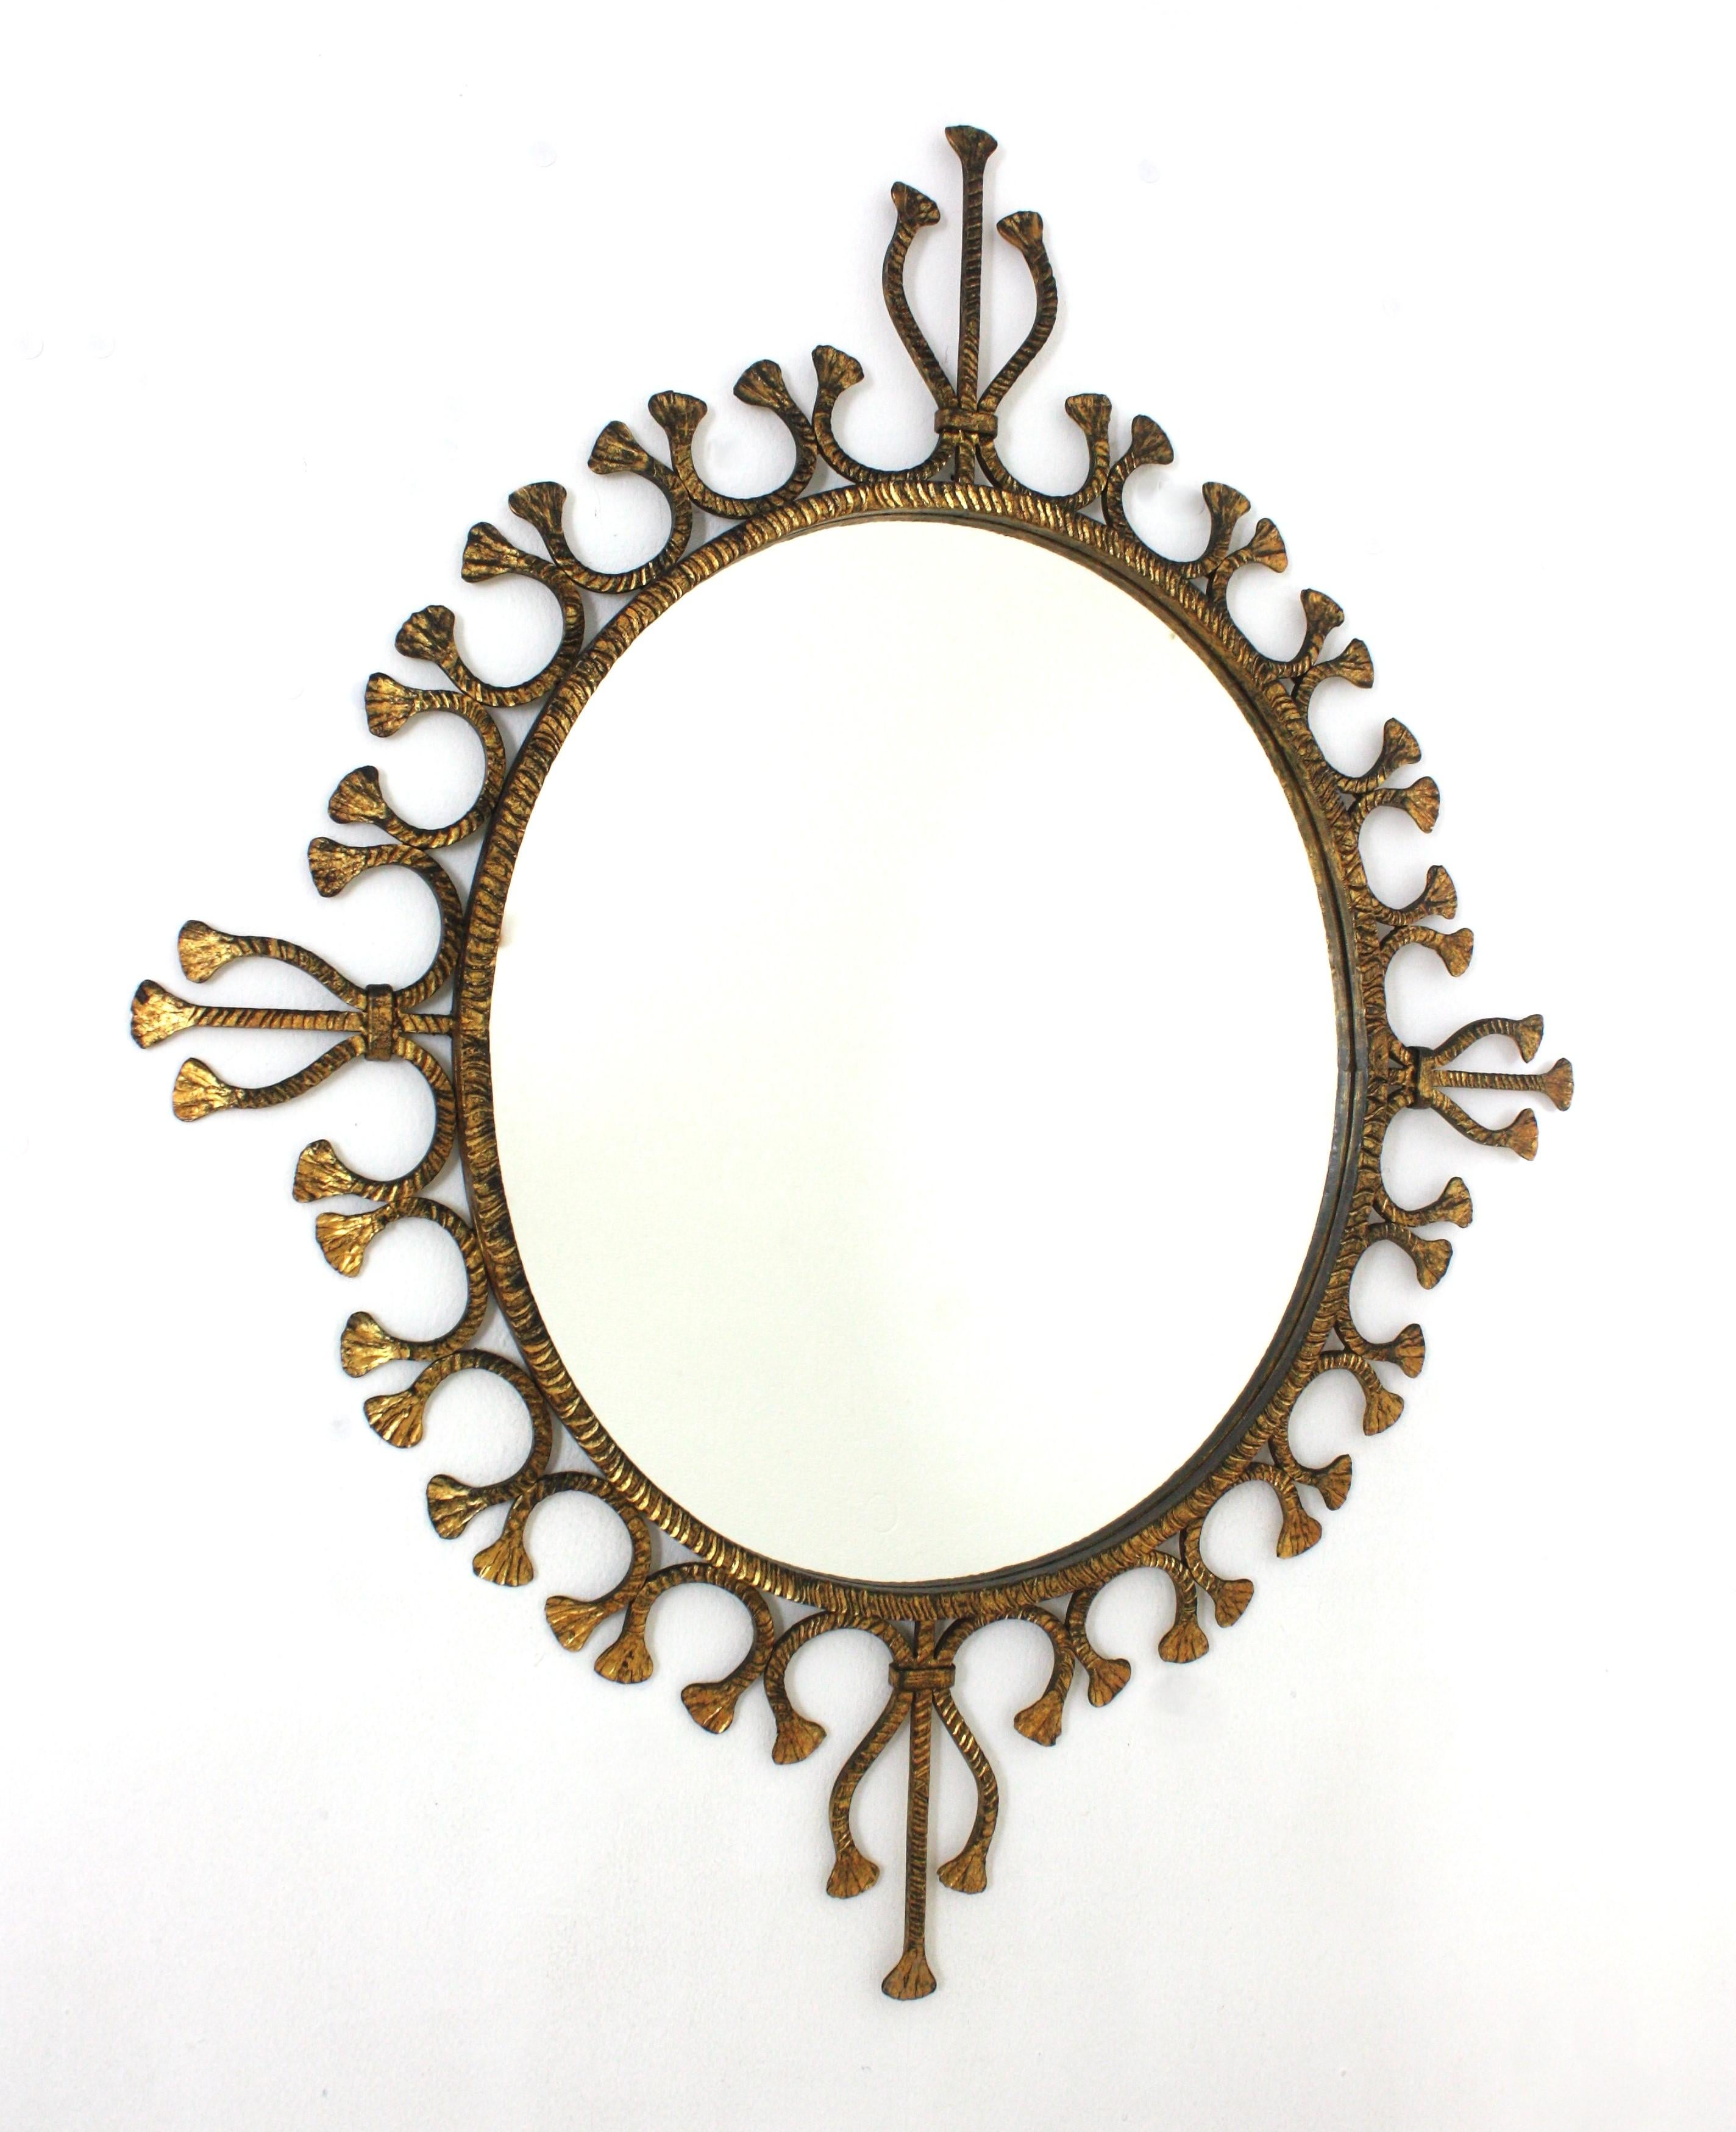 One of a kind Tassel Motif Sunburst Wall Mirror, Hand Forged Iron, Gold Leaf Spain, 1940s
Eye-catching Hollywood Regency gold gilt wrought iron sunburst mirror with tassel motifs on the frame.
This hand forged iron mirror was manufactured in Spain.